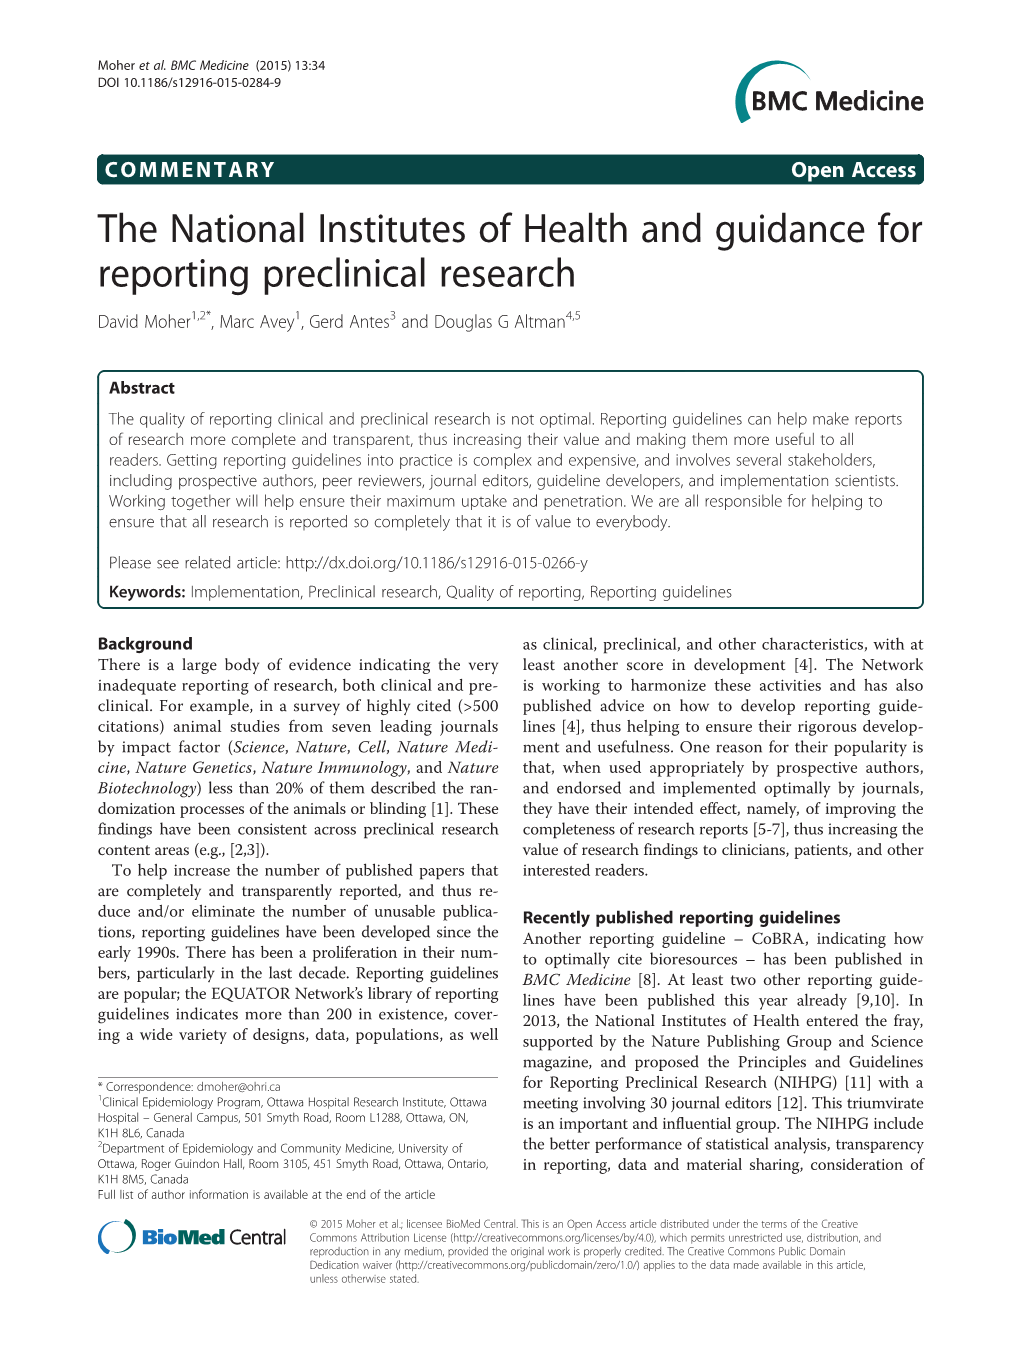 The National Institutes of Health and Guidance for Reporting Preclinical Research David Moher1,2*, Marc Avey1, Gerd Antes3 and Douglas G Altman4,5